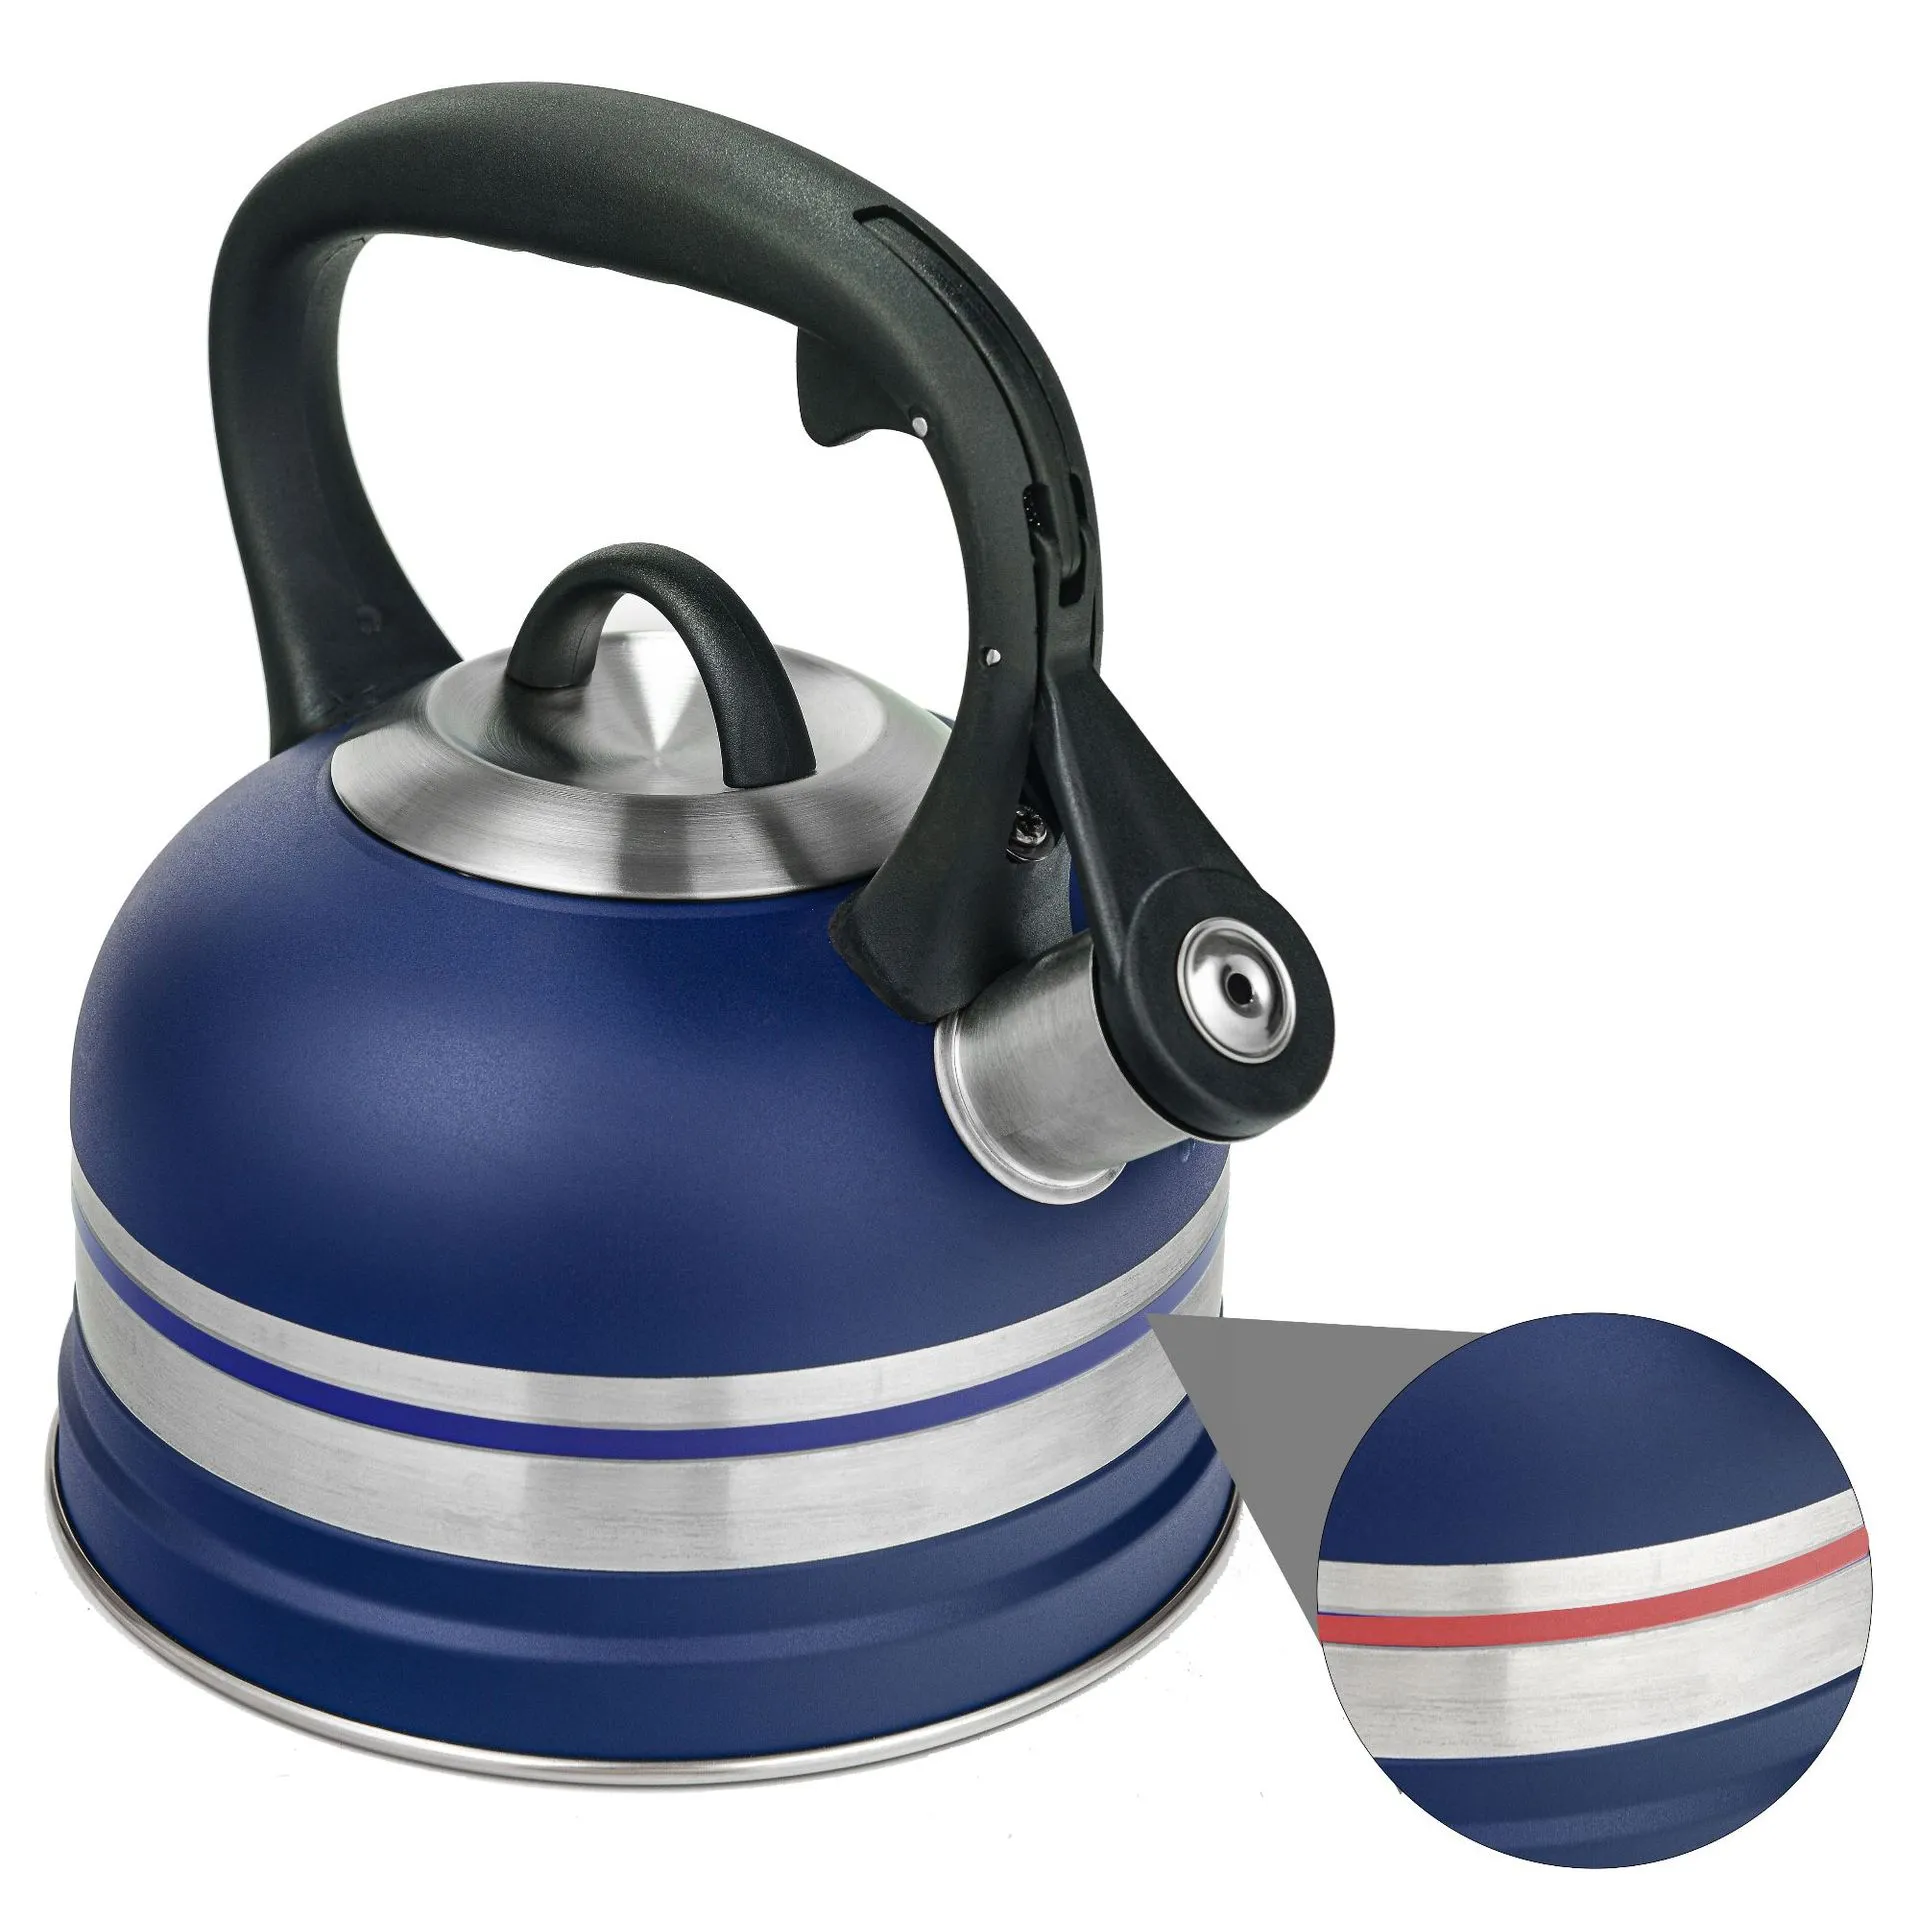 Stainless Steel Whistle Kettle Durable and ...